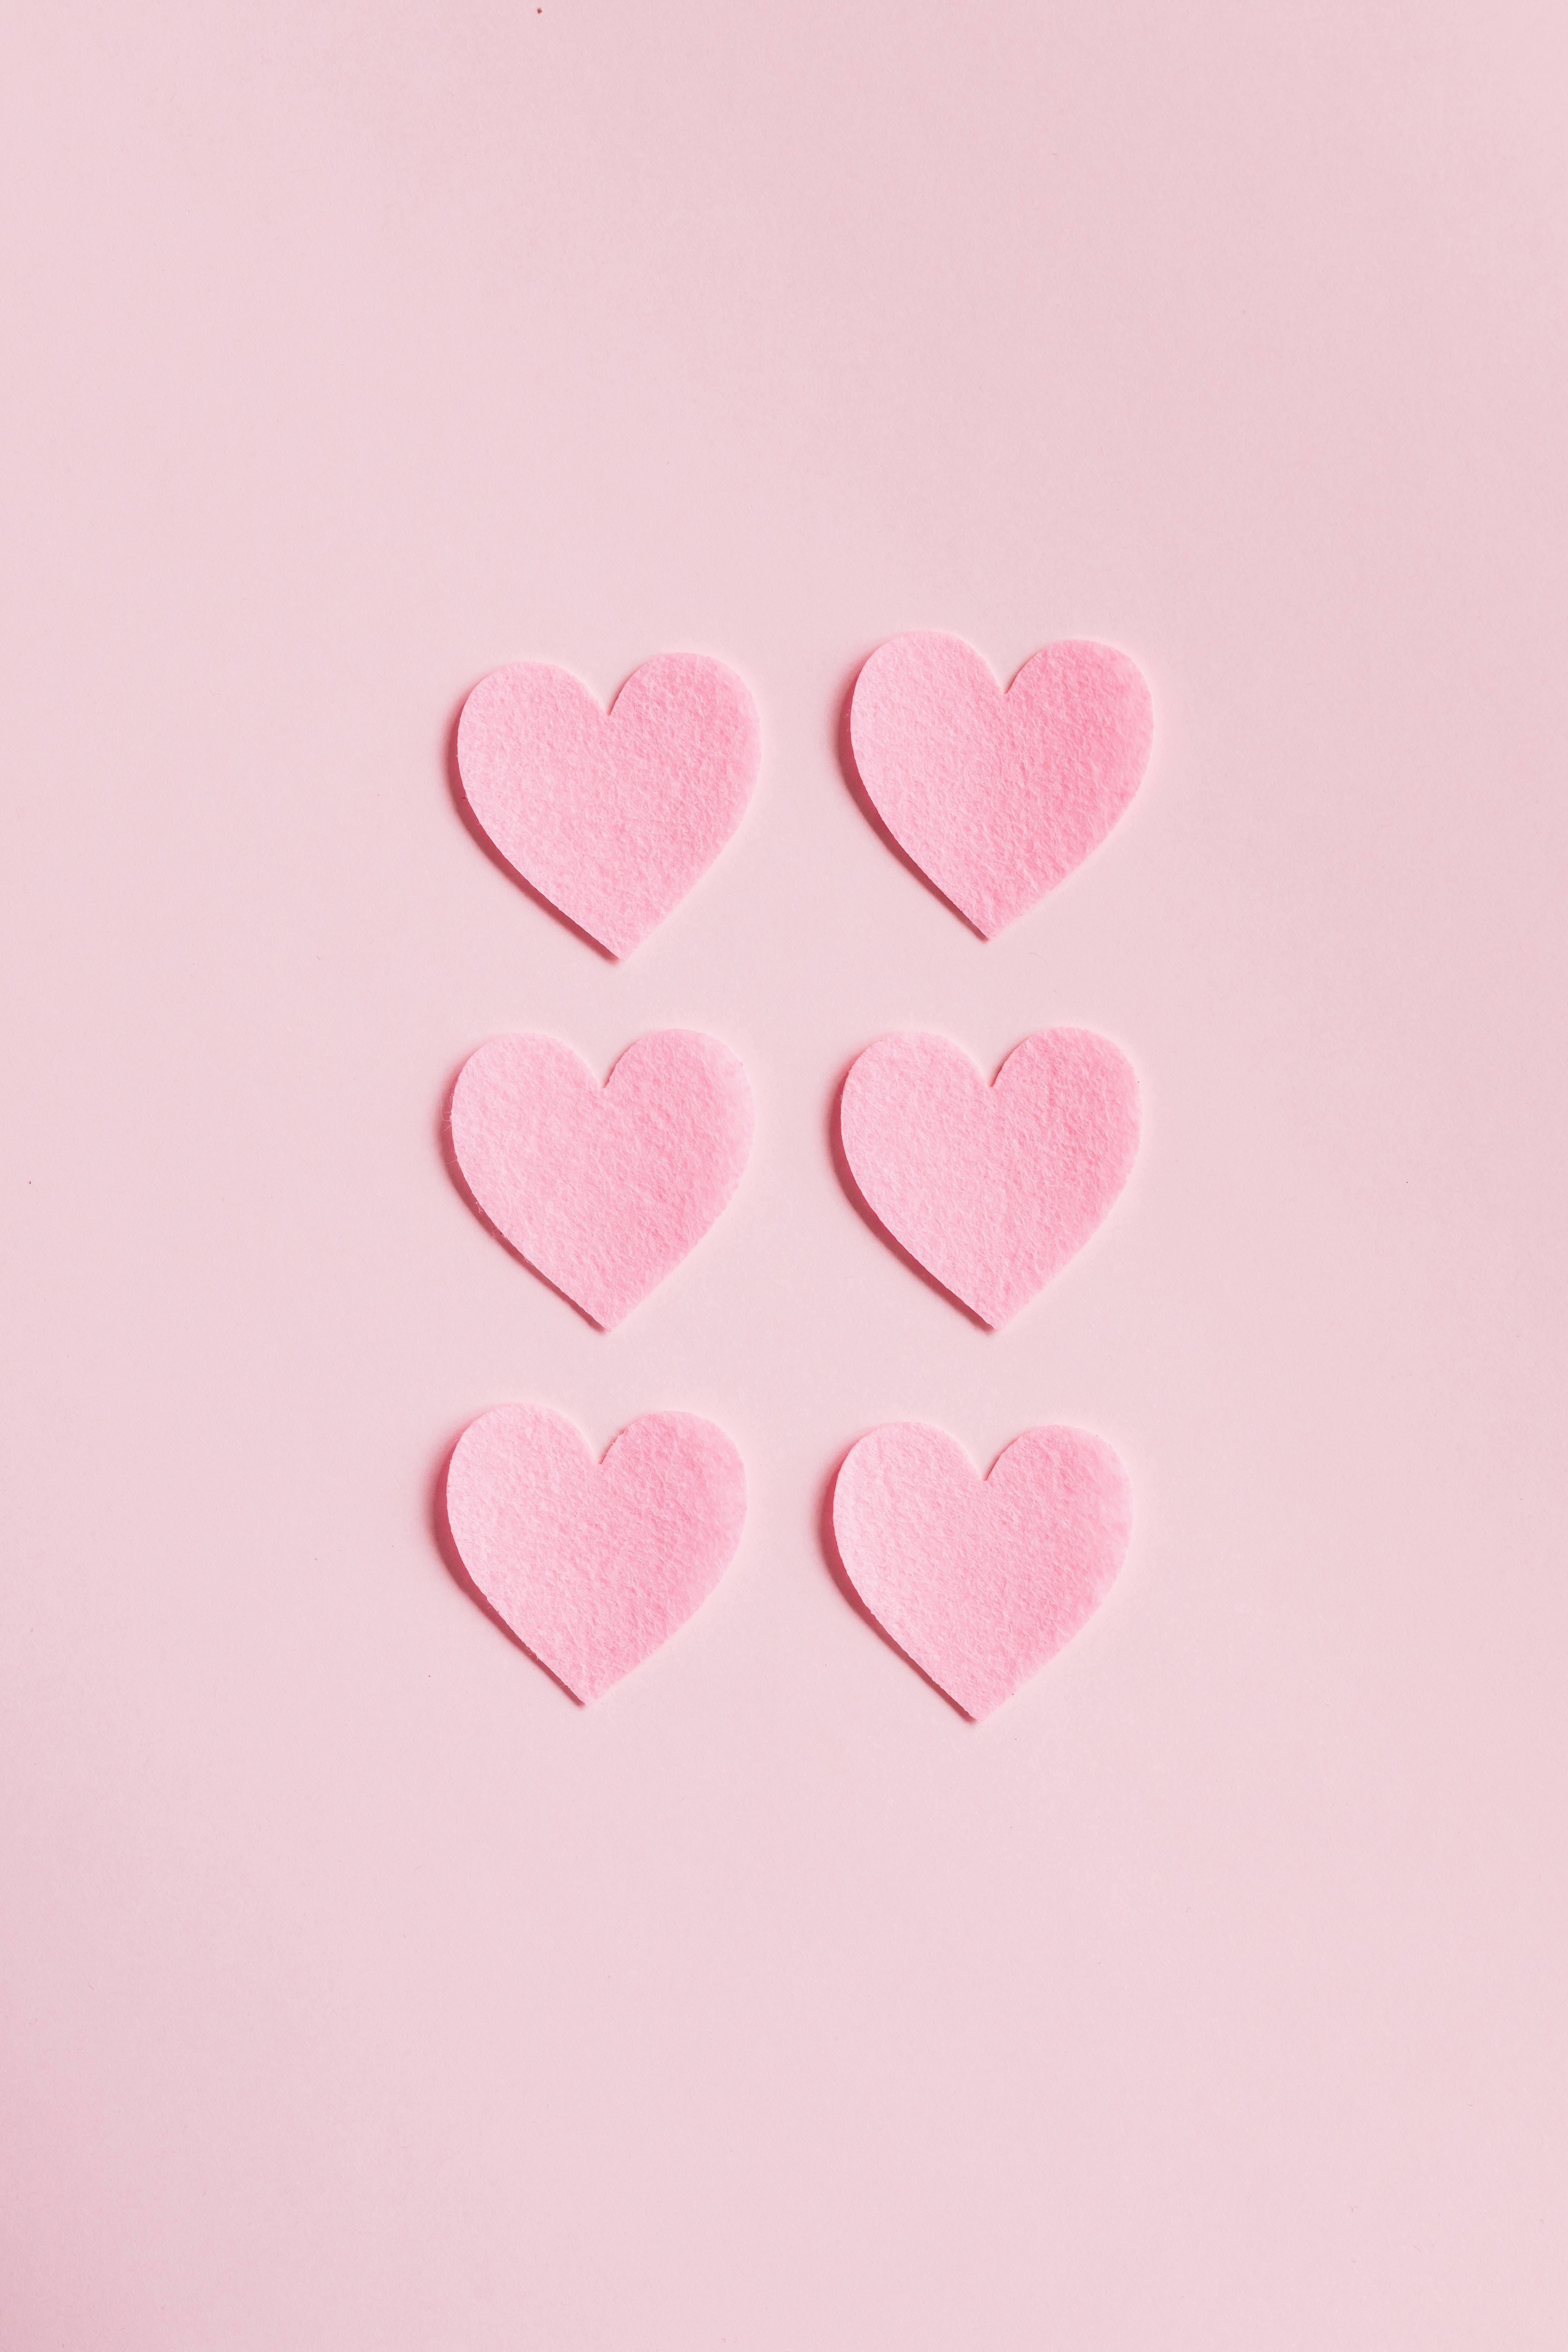 Heart Shaped Cutouts on Pink Background · Free